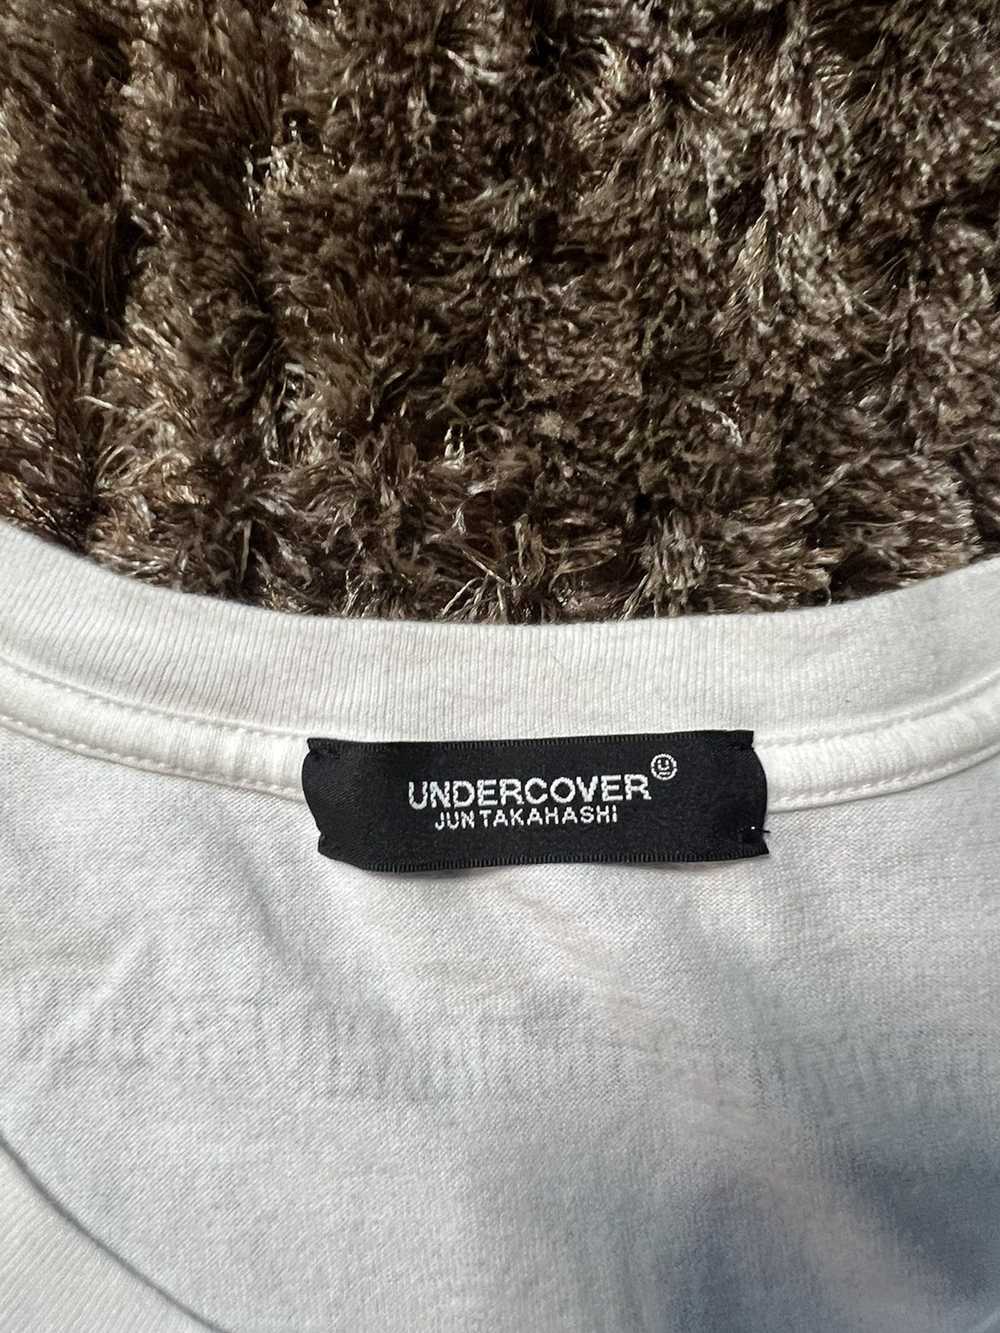 Undercover Undercover scab logo tee - image 3